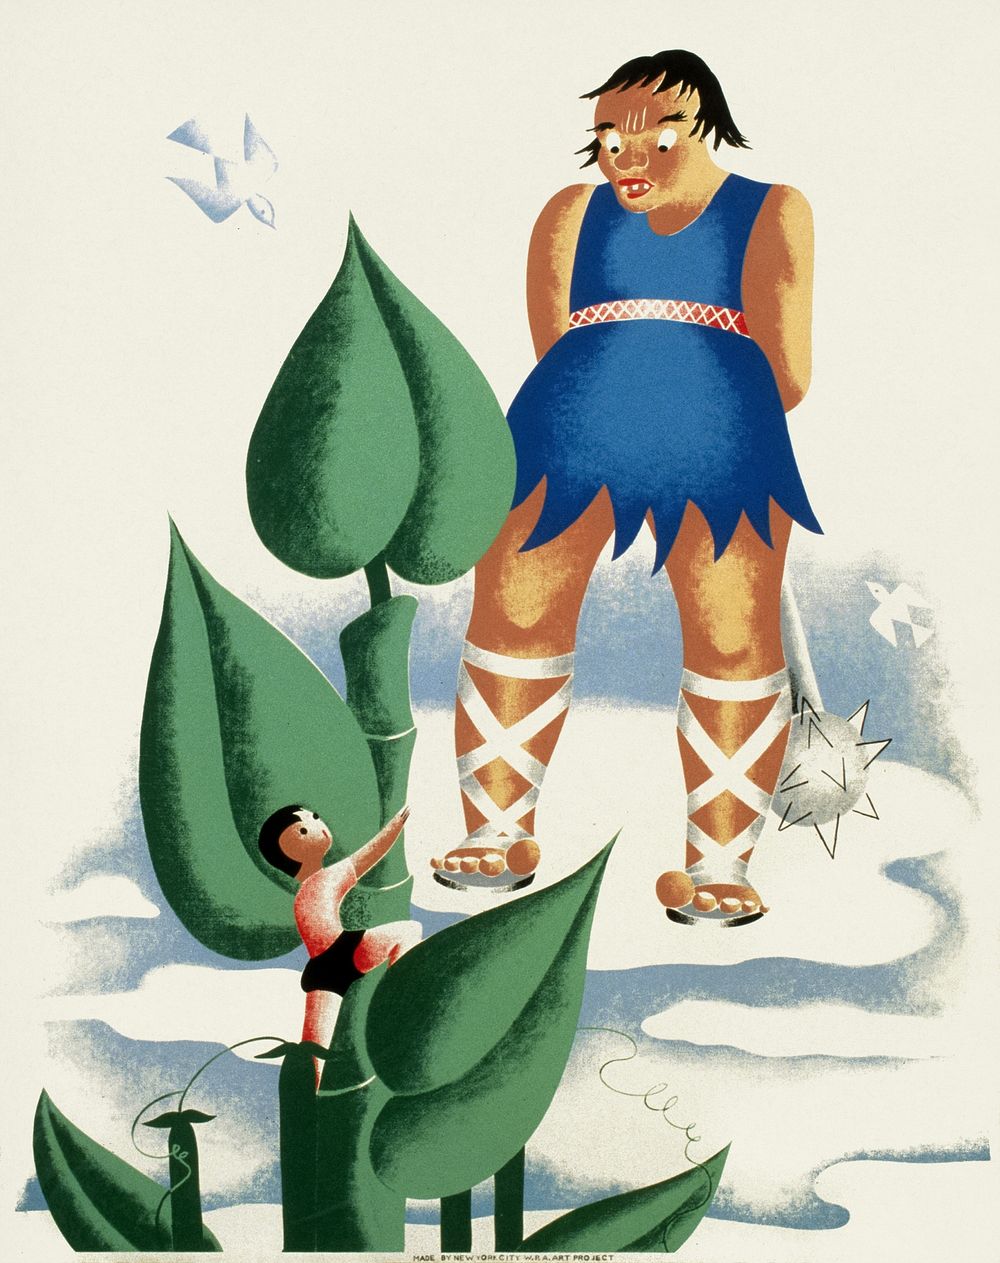 Jack and the beanstalk (1936) poster by Aida McKenzie. Original public domain image from the Library of Congress. Digitally…